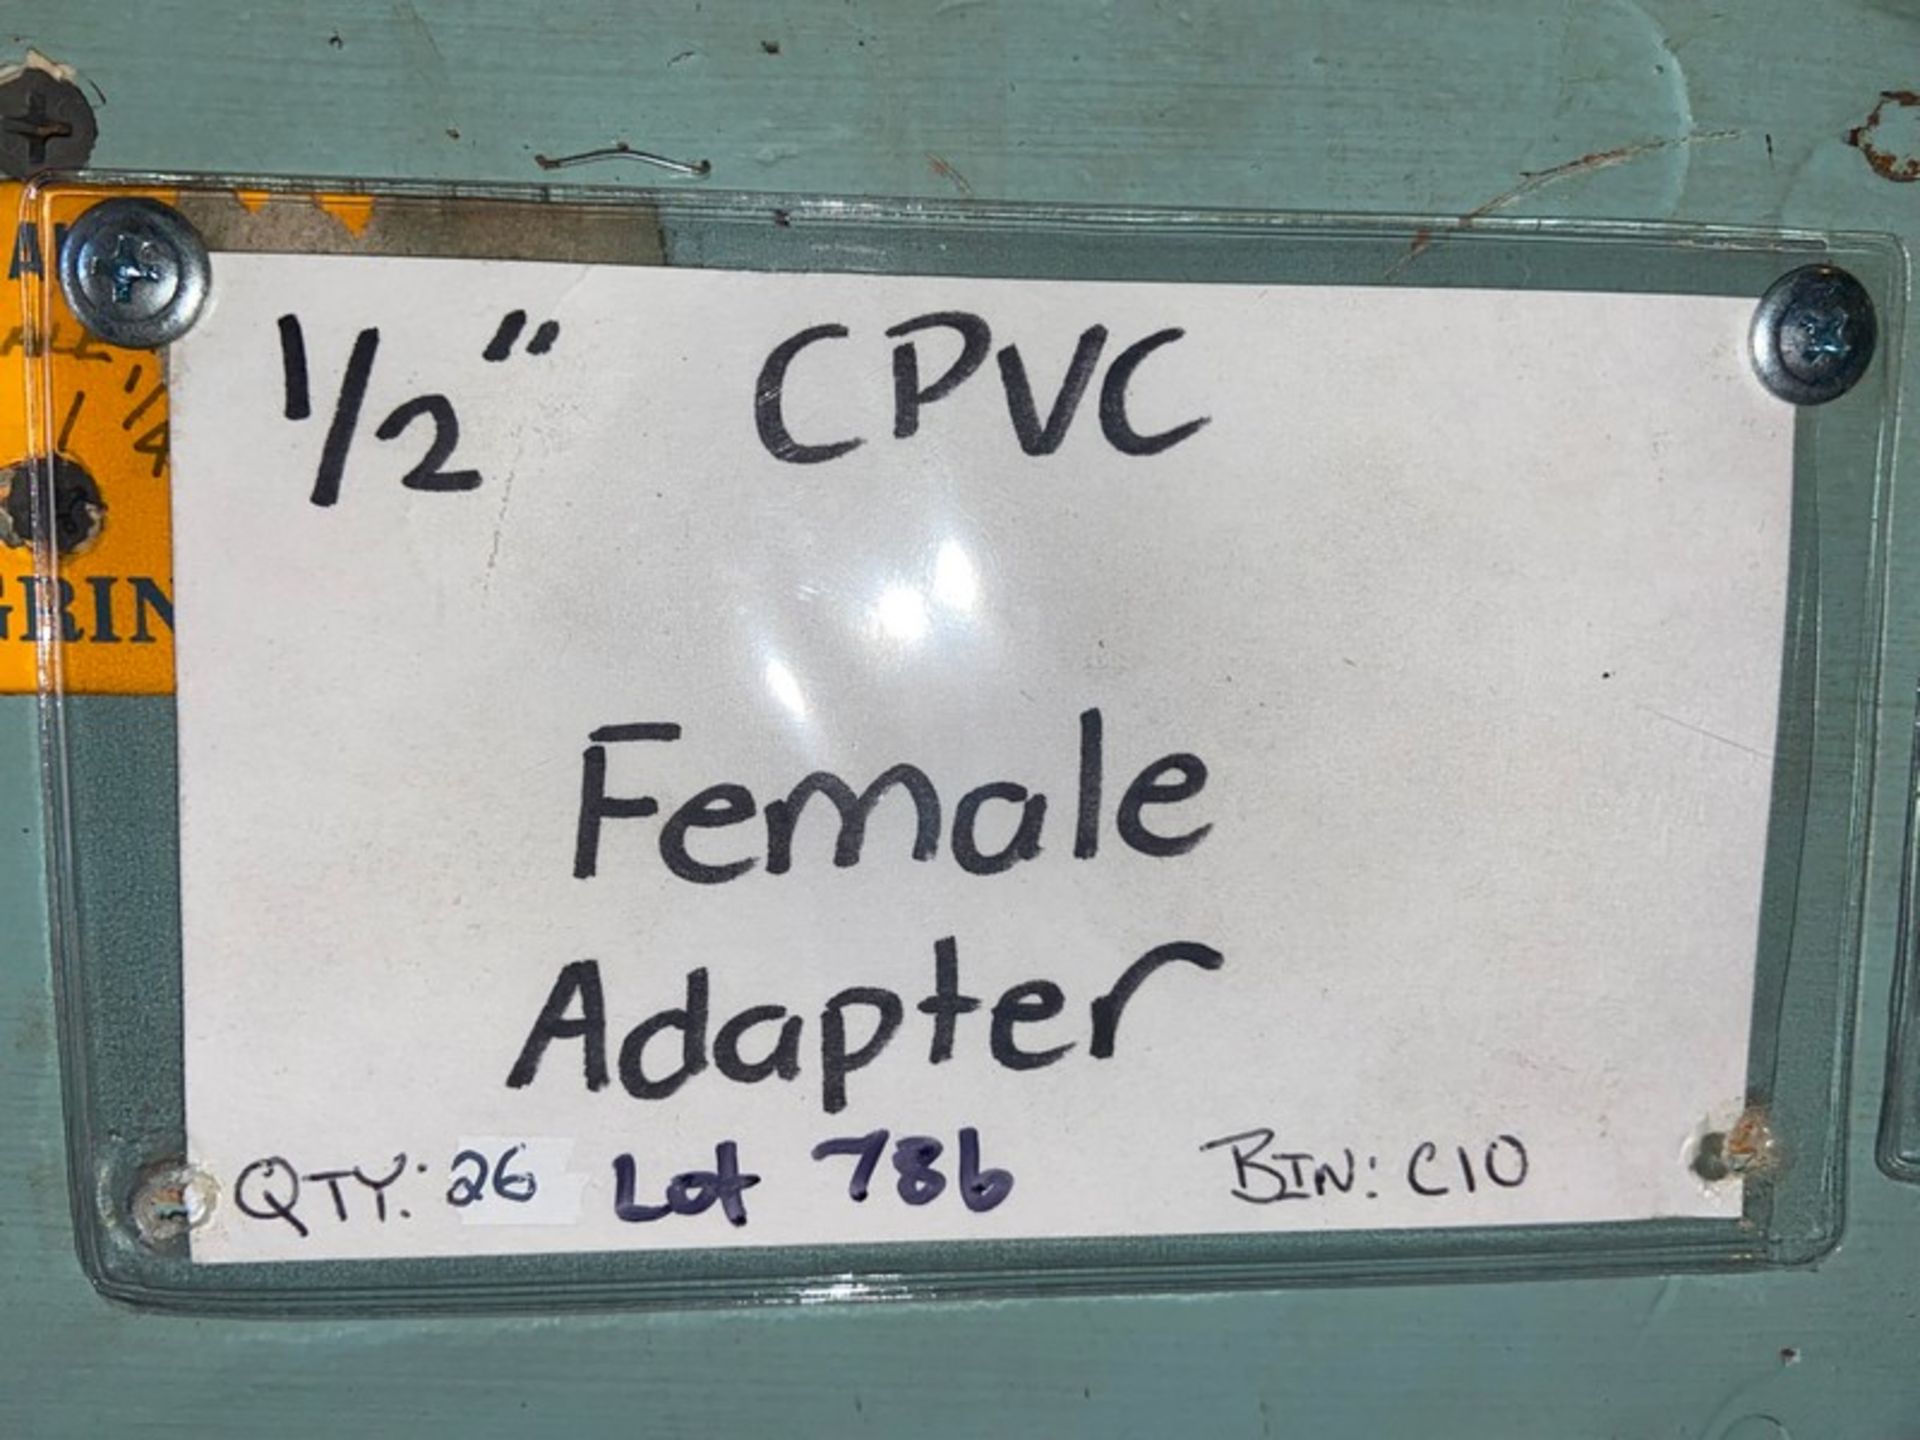 (28) 1/2” CPVC Female Adapter (Bin:C10) (LOCATED IN MONROEVILLE, PA) - Image 2 of 4